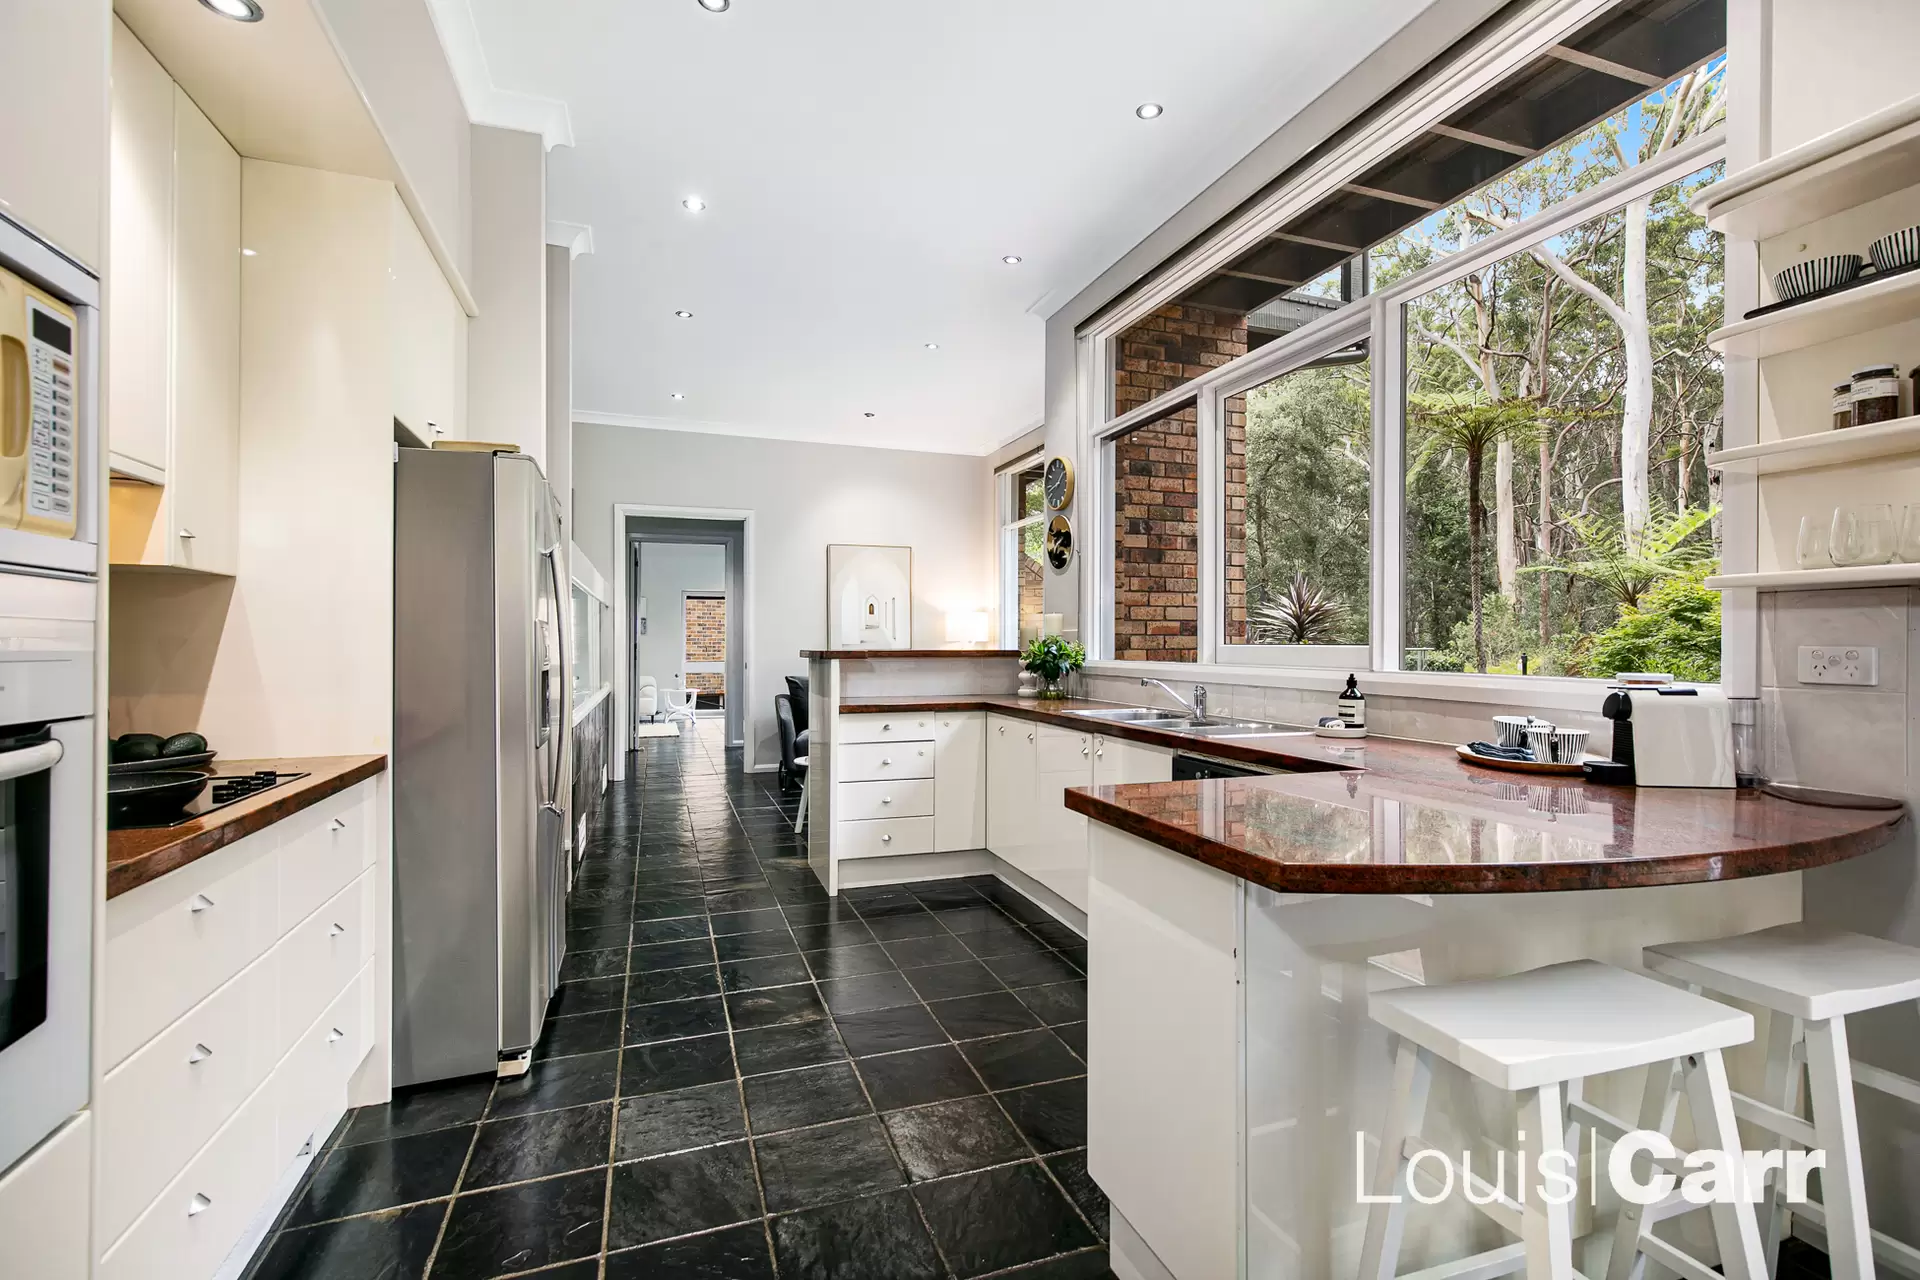 Photo #5: 14 Heidi Place, West Pennant Hills - Sold by Louis Carr Real Estate